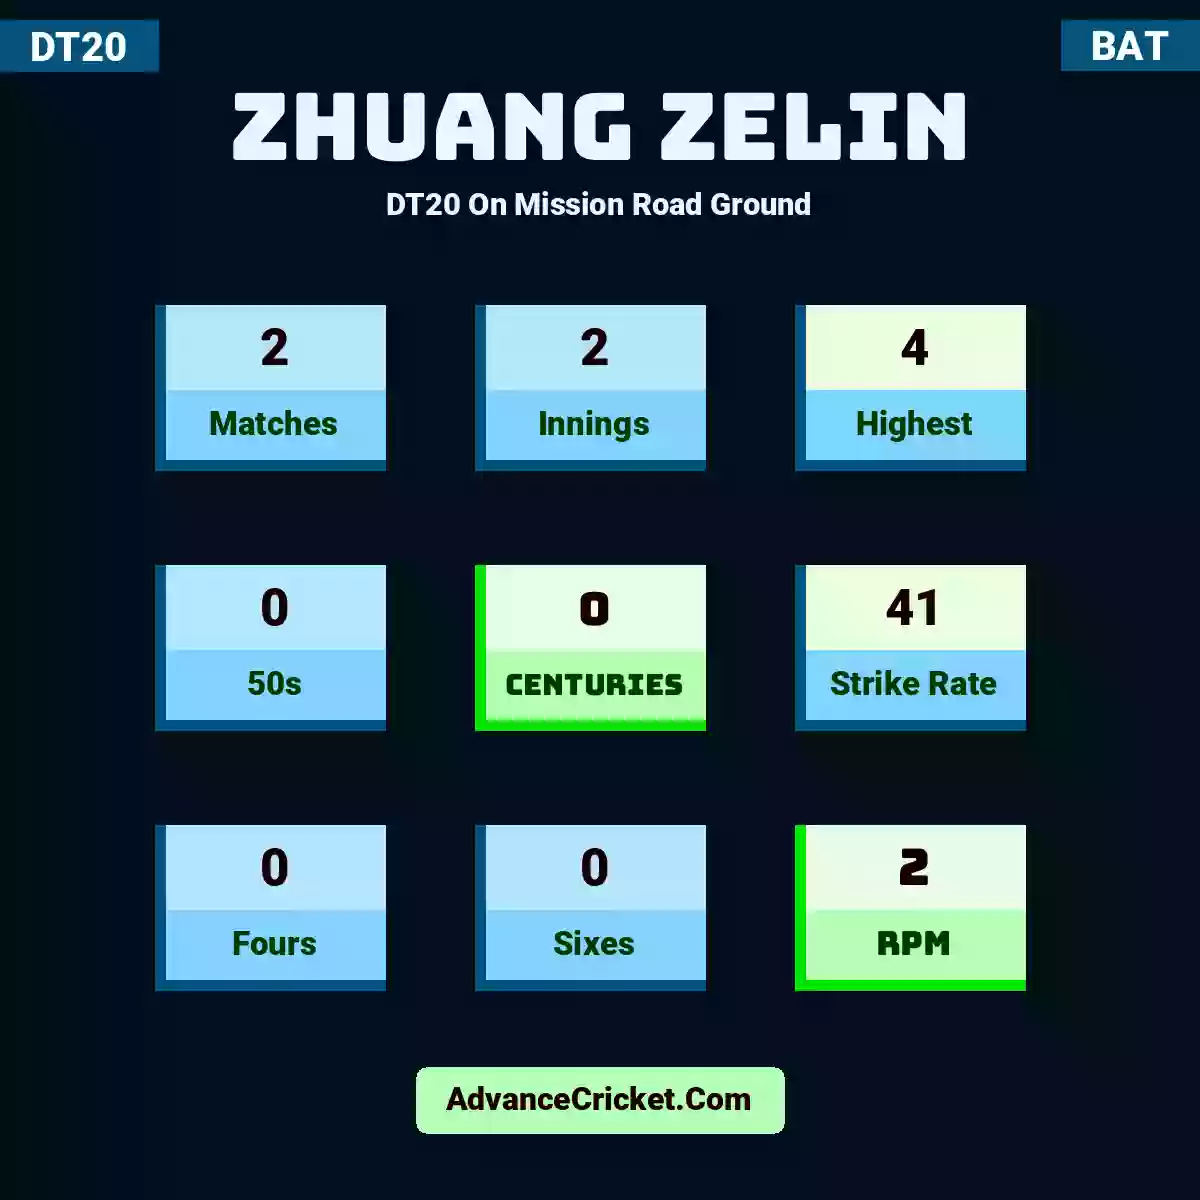 Zhuang Zelin DT20  On Mission Road Ground, Zhuang Zelin played 2 matches, scored 4 runs as highest, 0 half-centuries, and 0 centuries, with a strike rate of 41. Z.Zelin hit 0 fours and 0 sixes, with an RPM of 2.